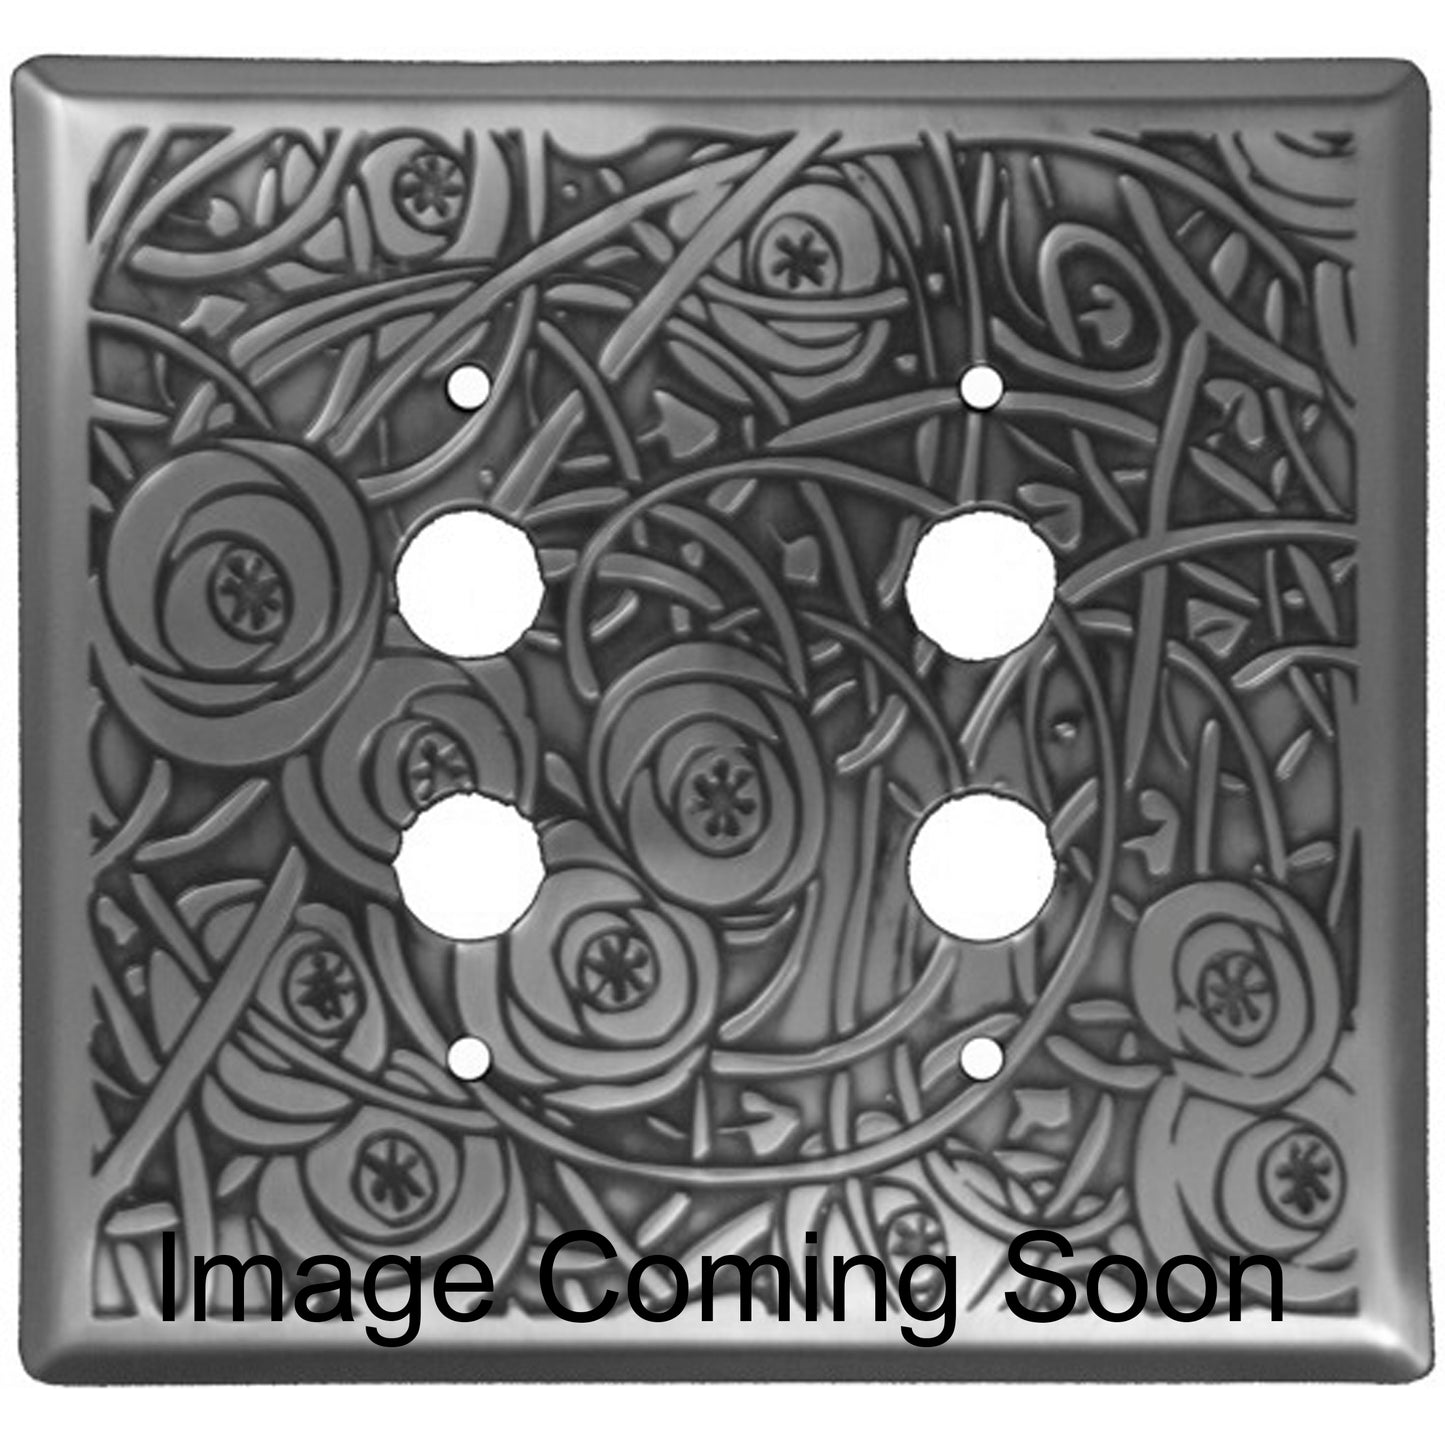 Deco Floral Stainless Steel 2 PushbuttonSwitchplate